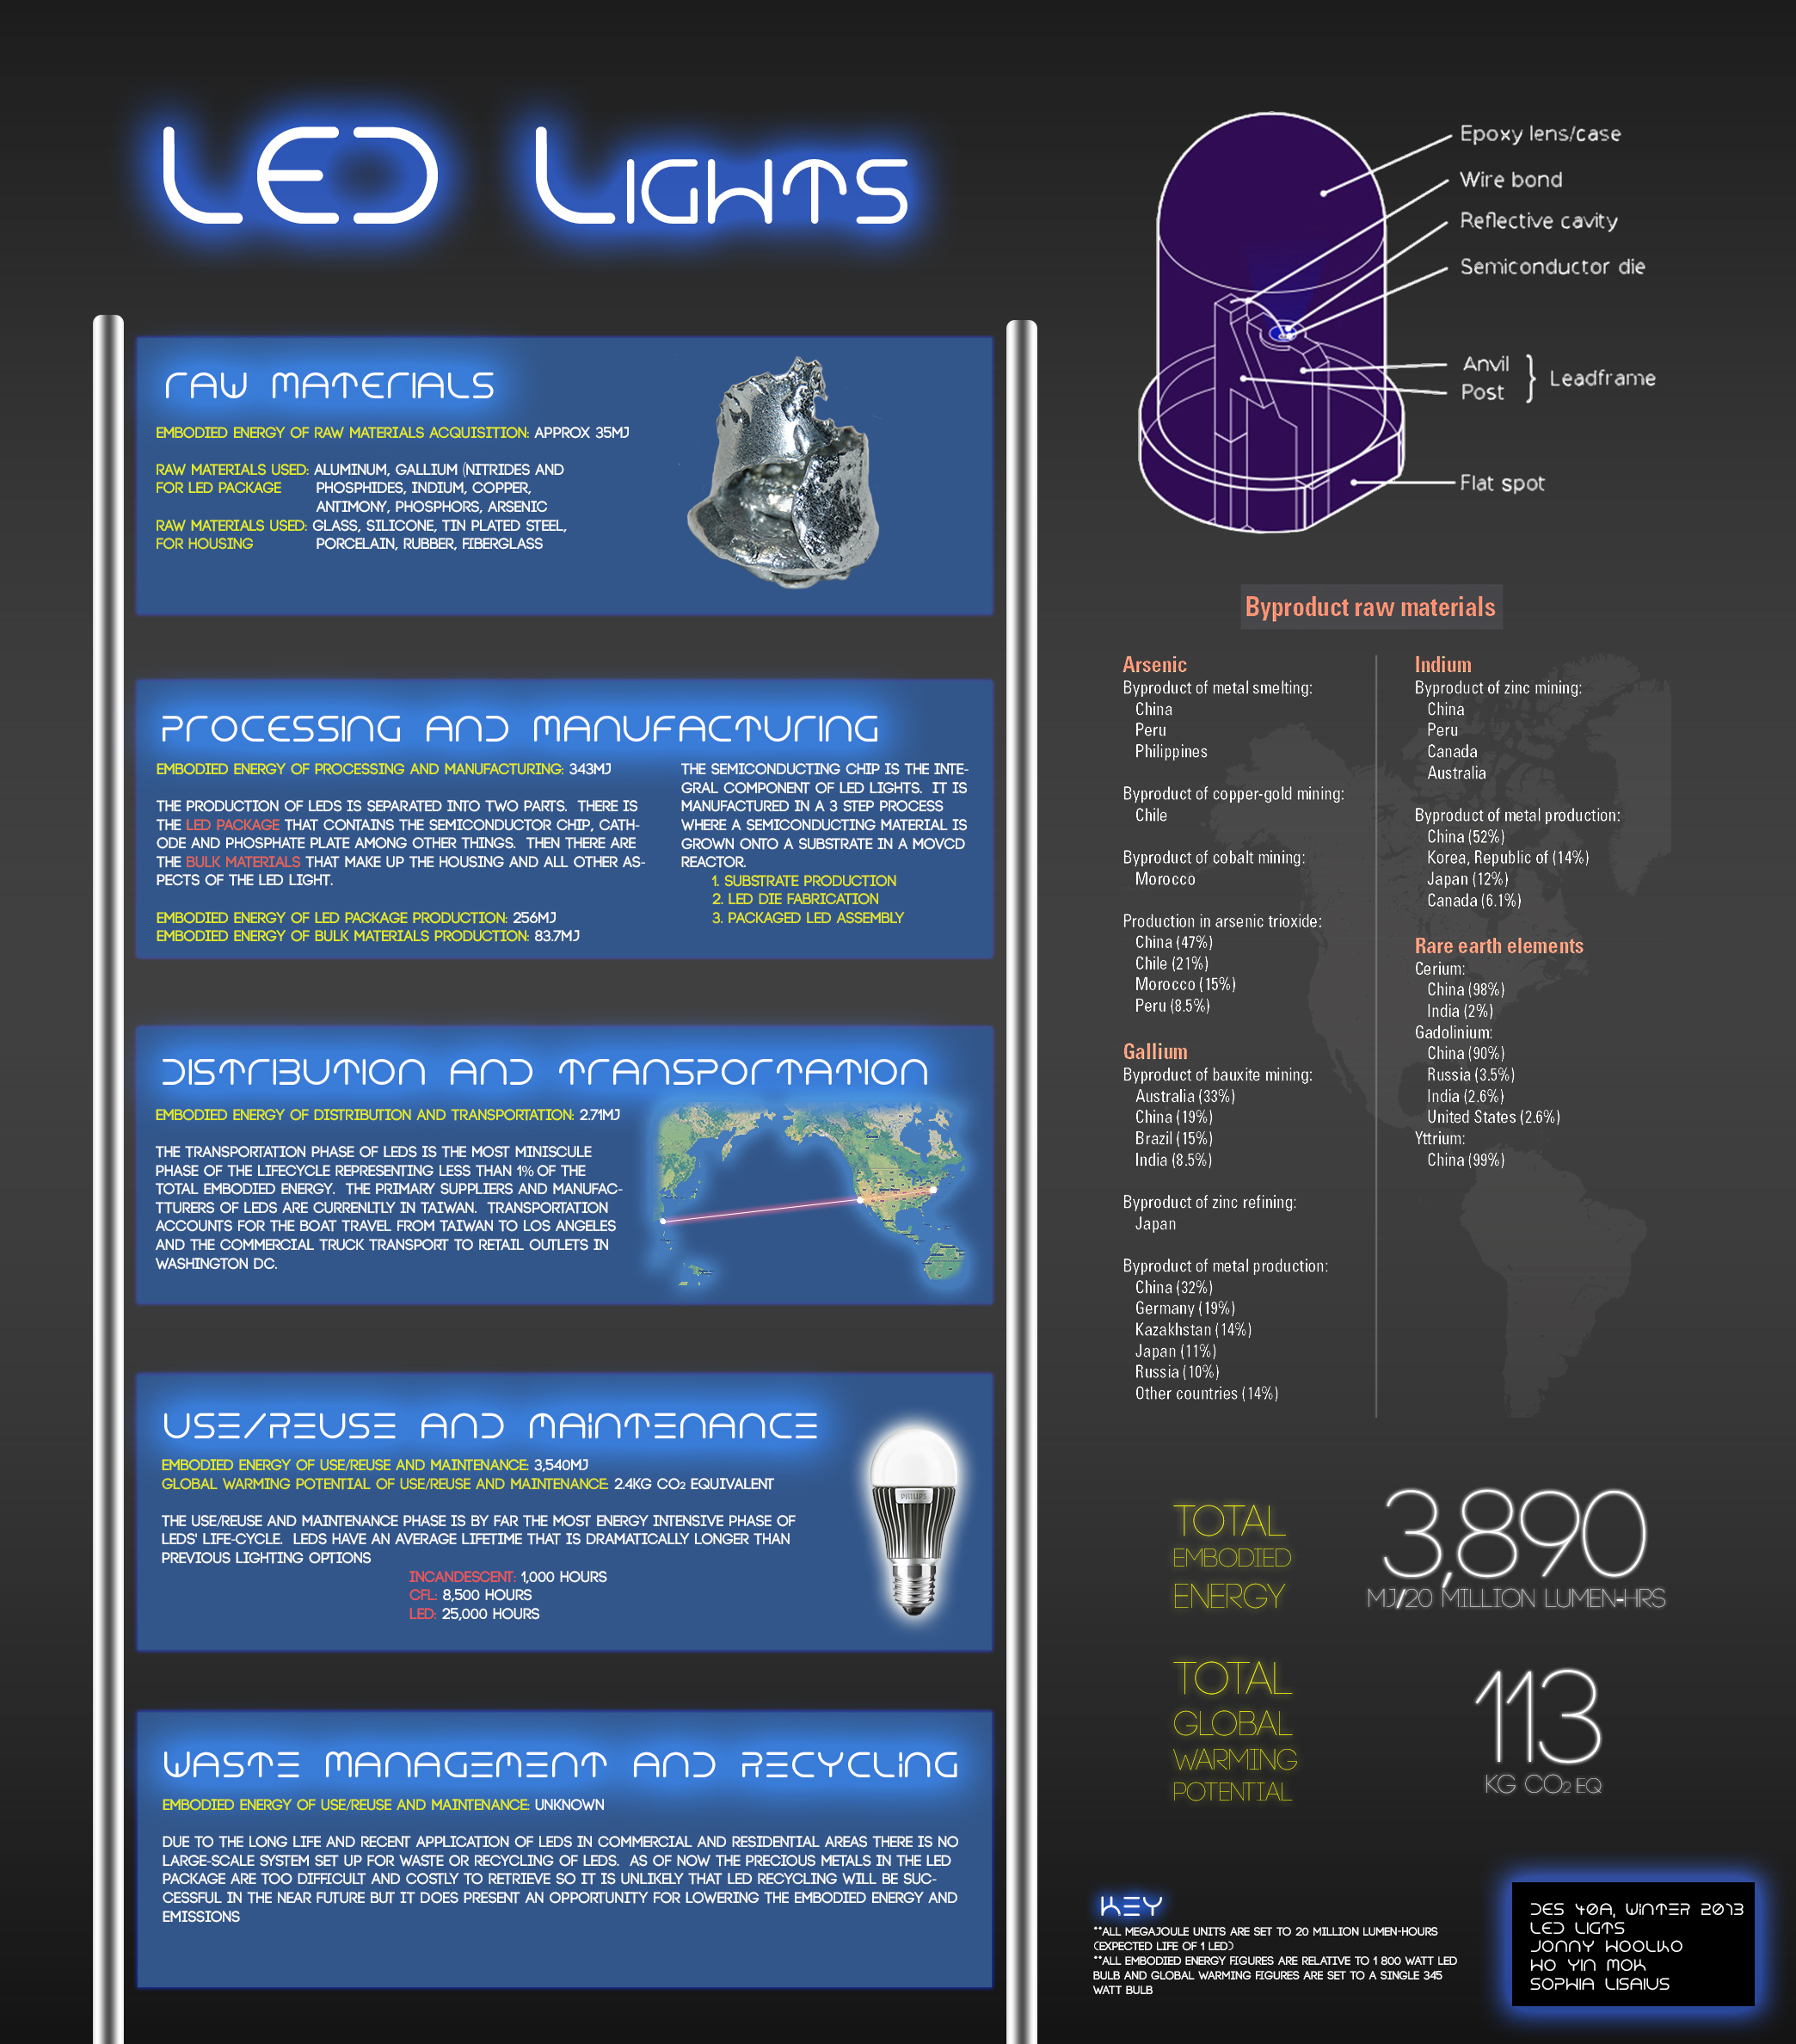 Can LED Lights Catch On Fire? - Answered! - The Safety Source LLC